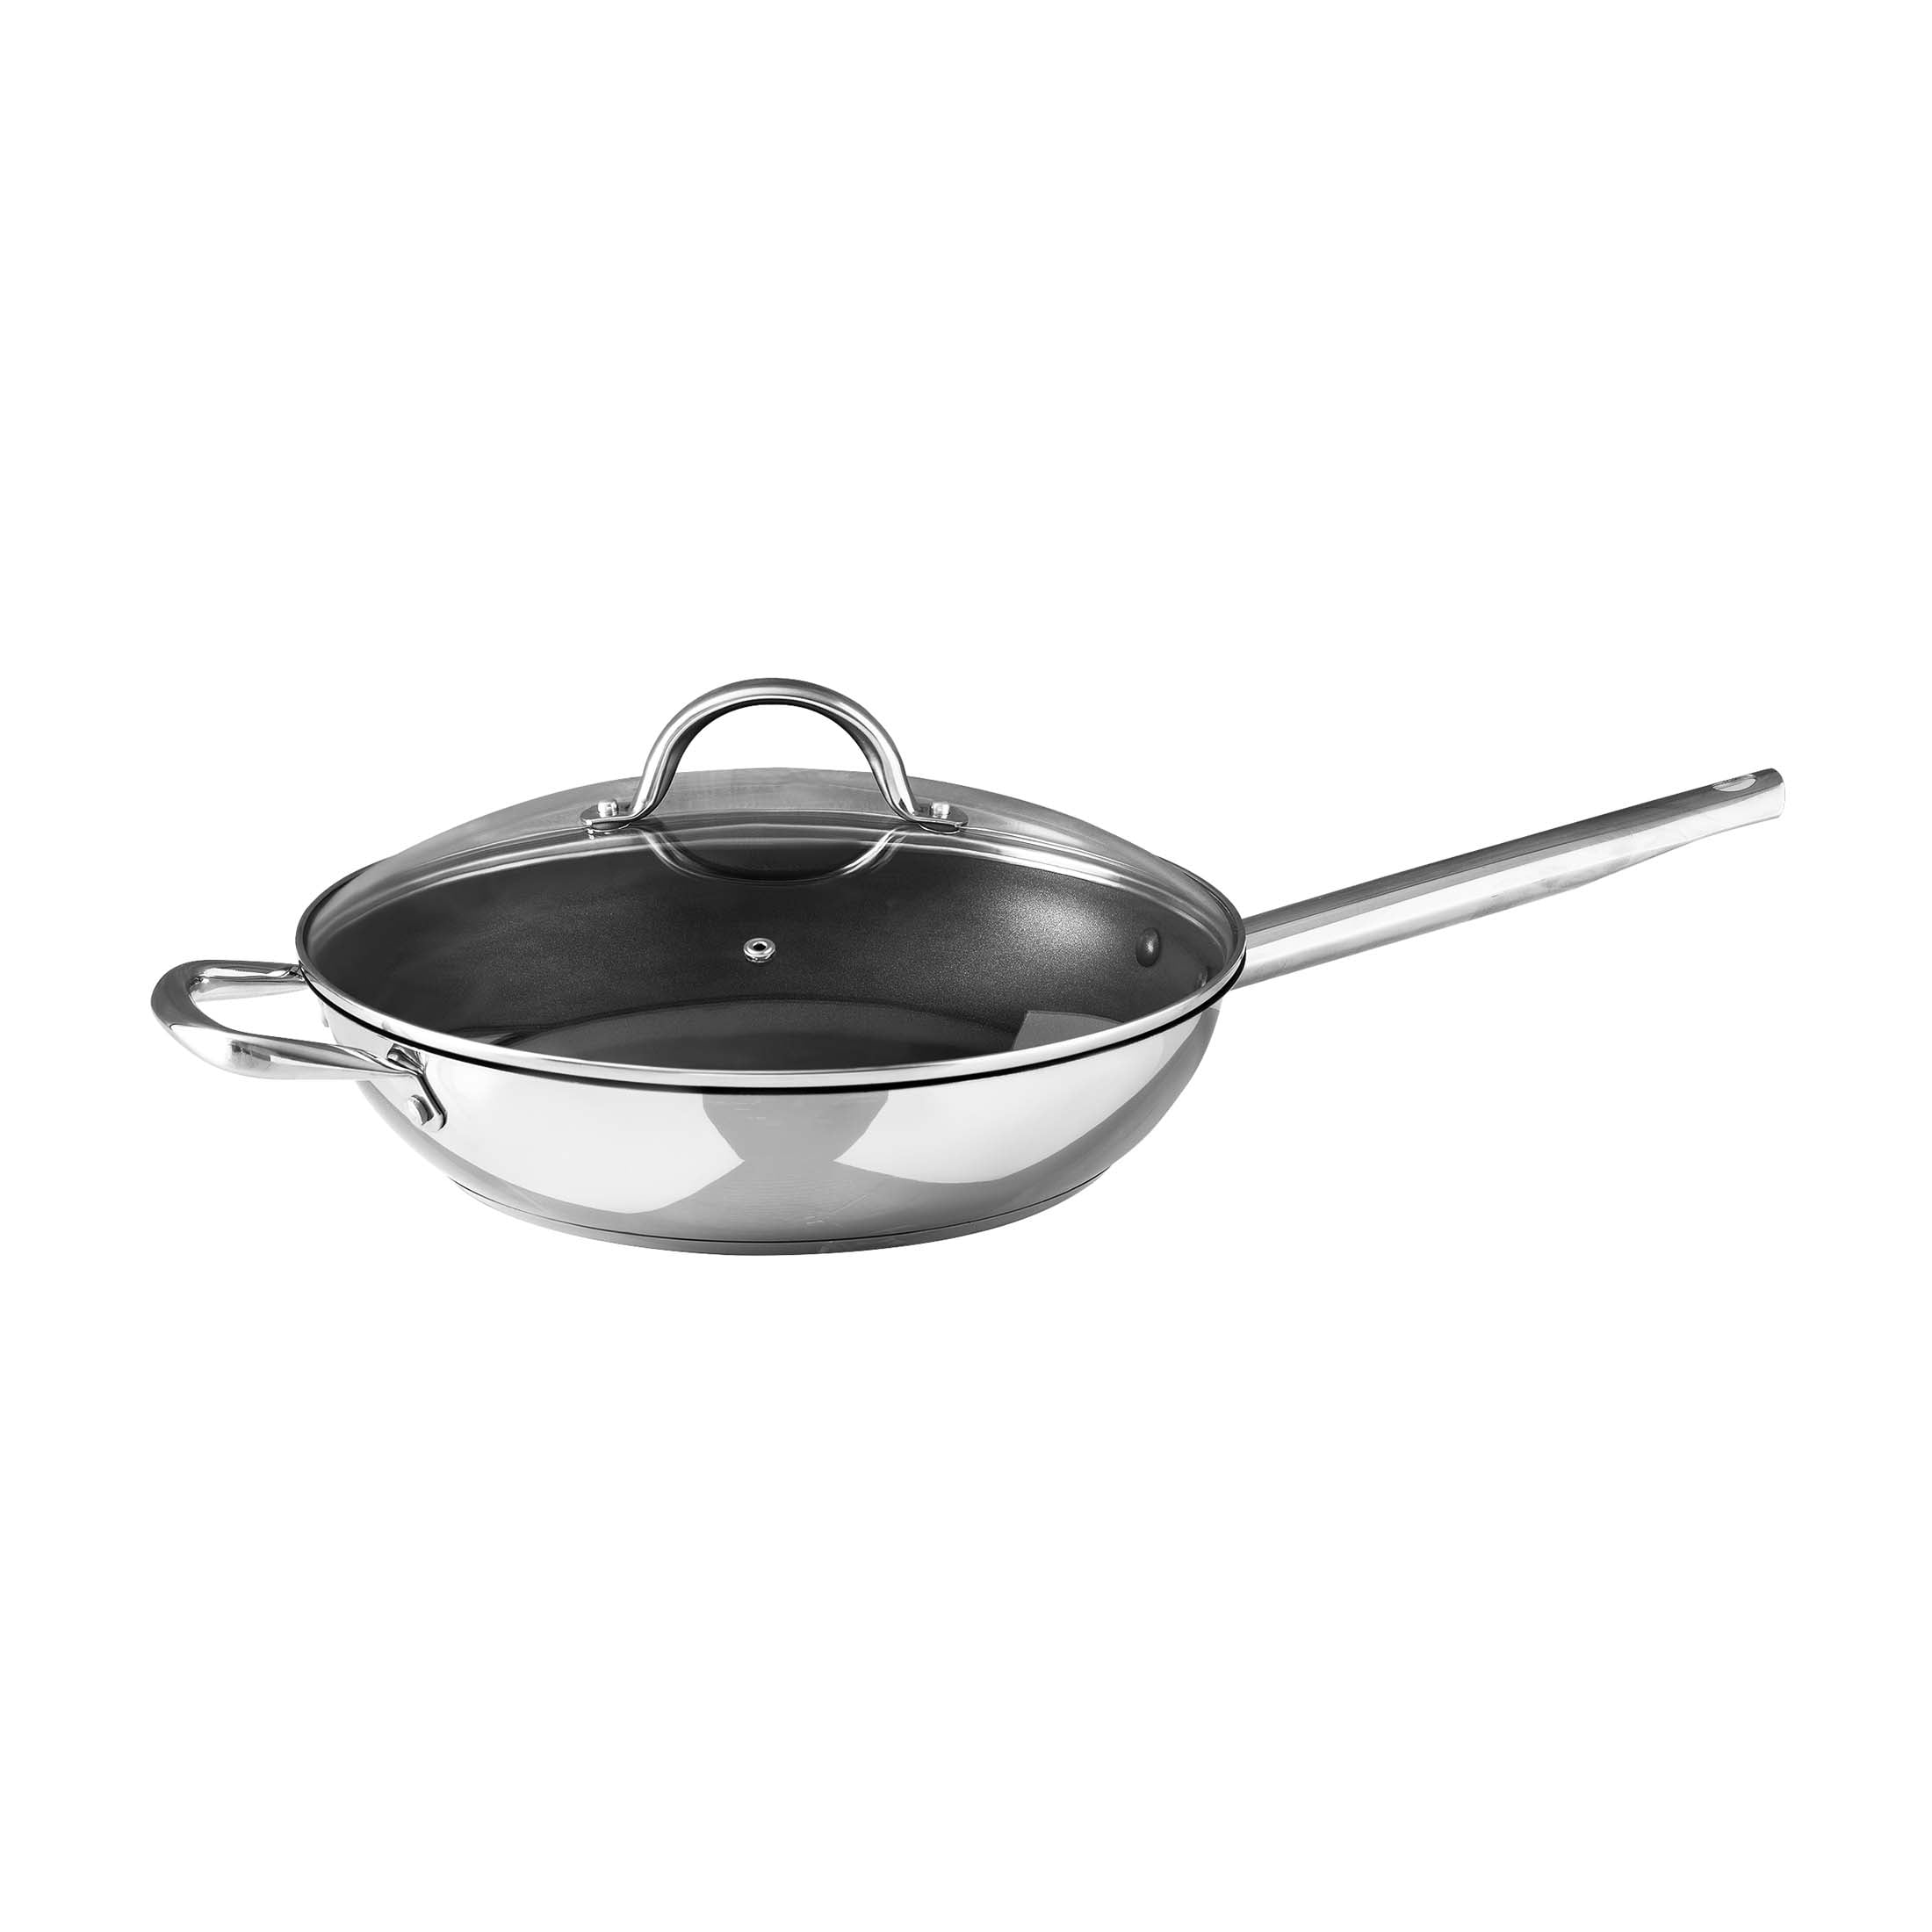 Non stick wok Stir Frying Pan Small Handle Boiling Pot with Vented Glass Lid 